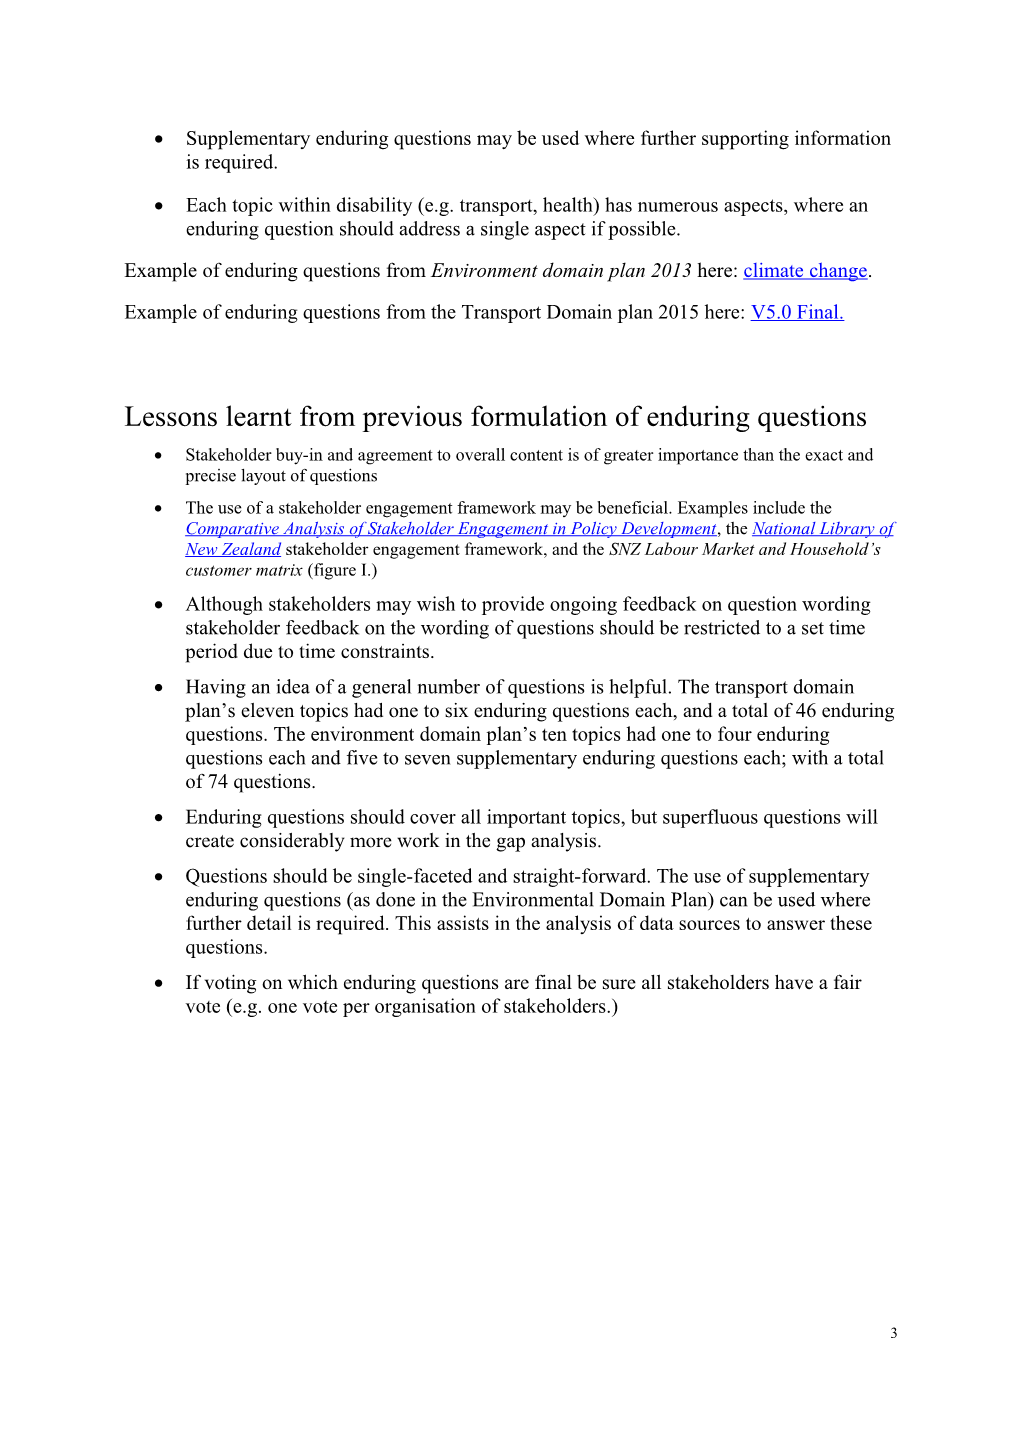 A Process for Establishing Enduring Questions in the Disability Domain